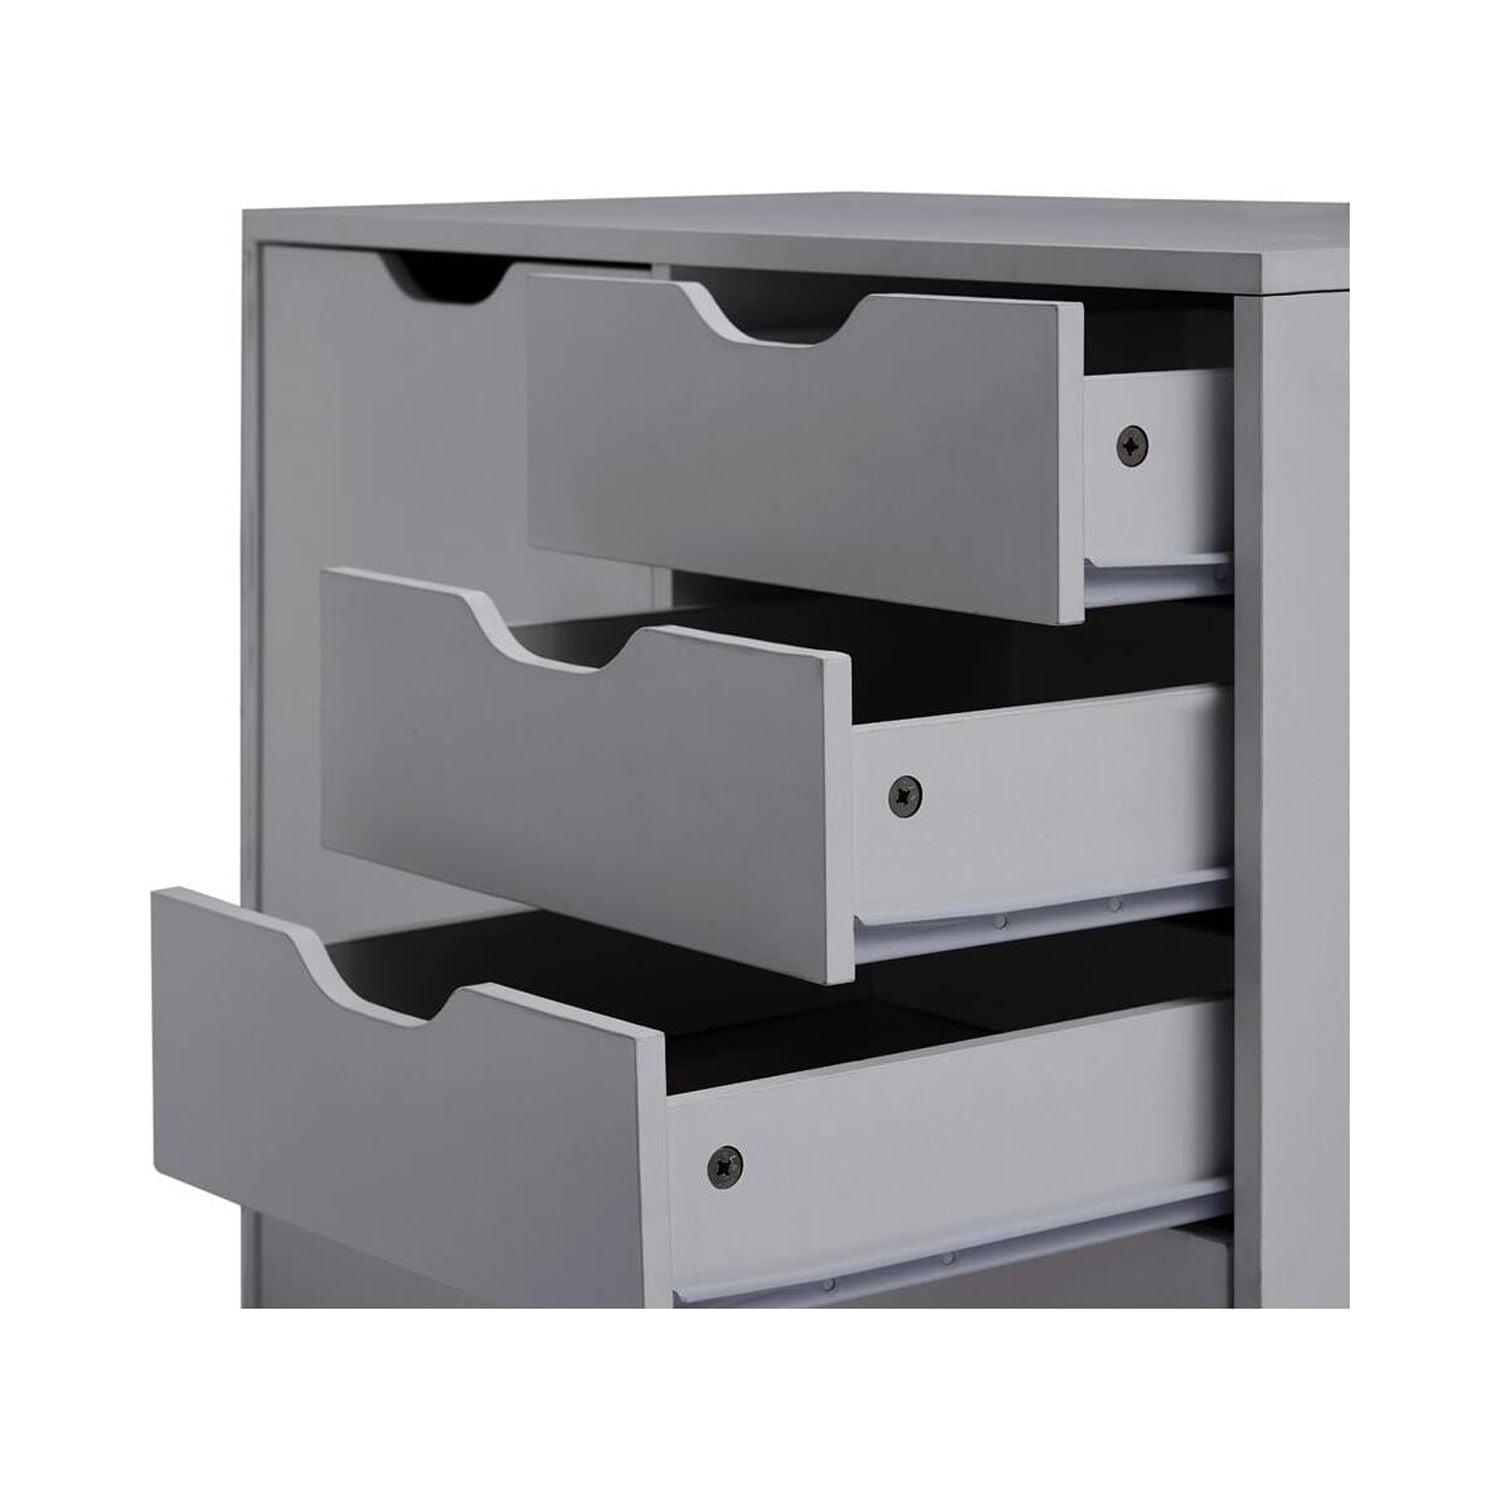  Goujxcy 7 Drawer Chest, Mobile File Cabinet with